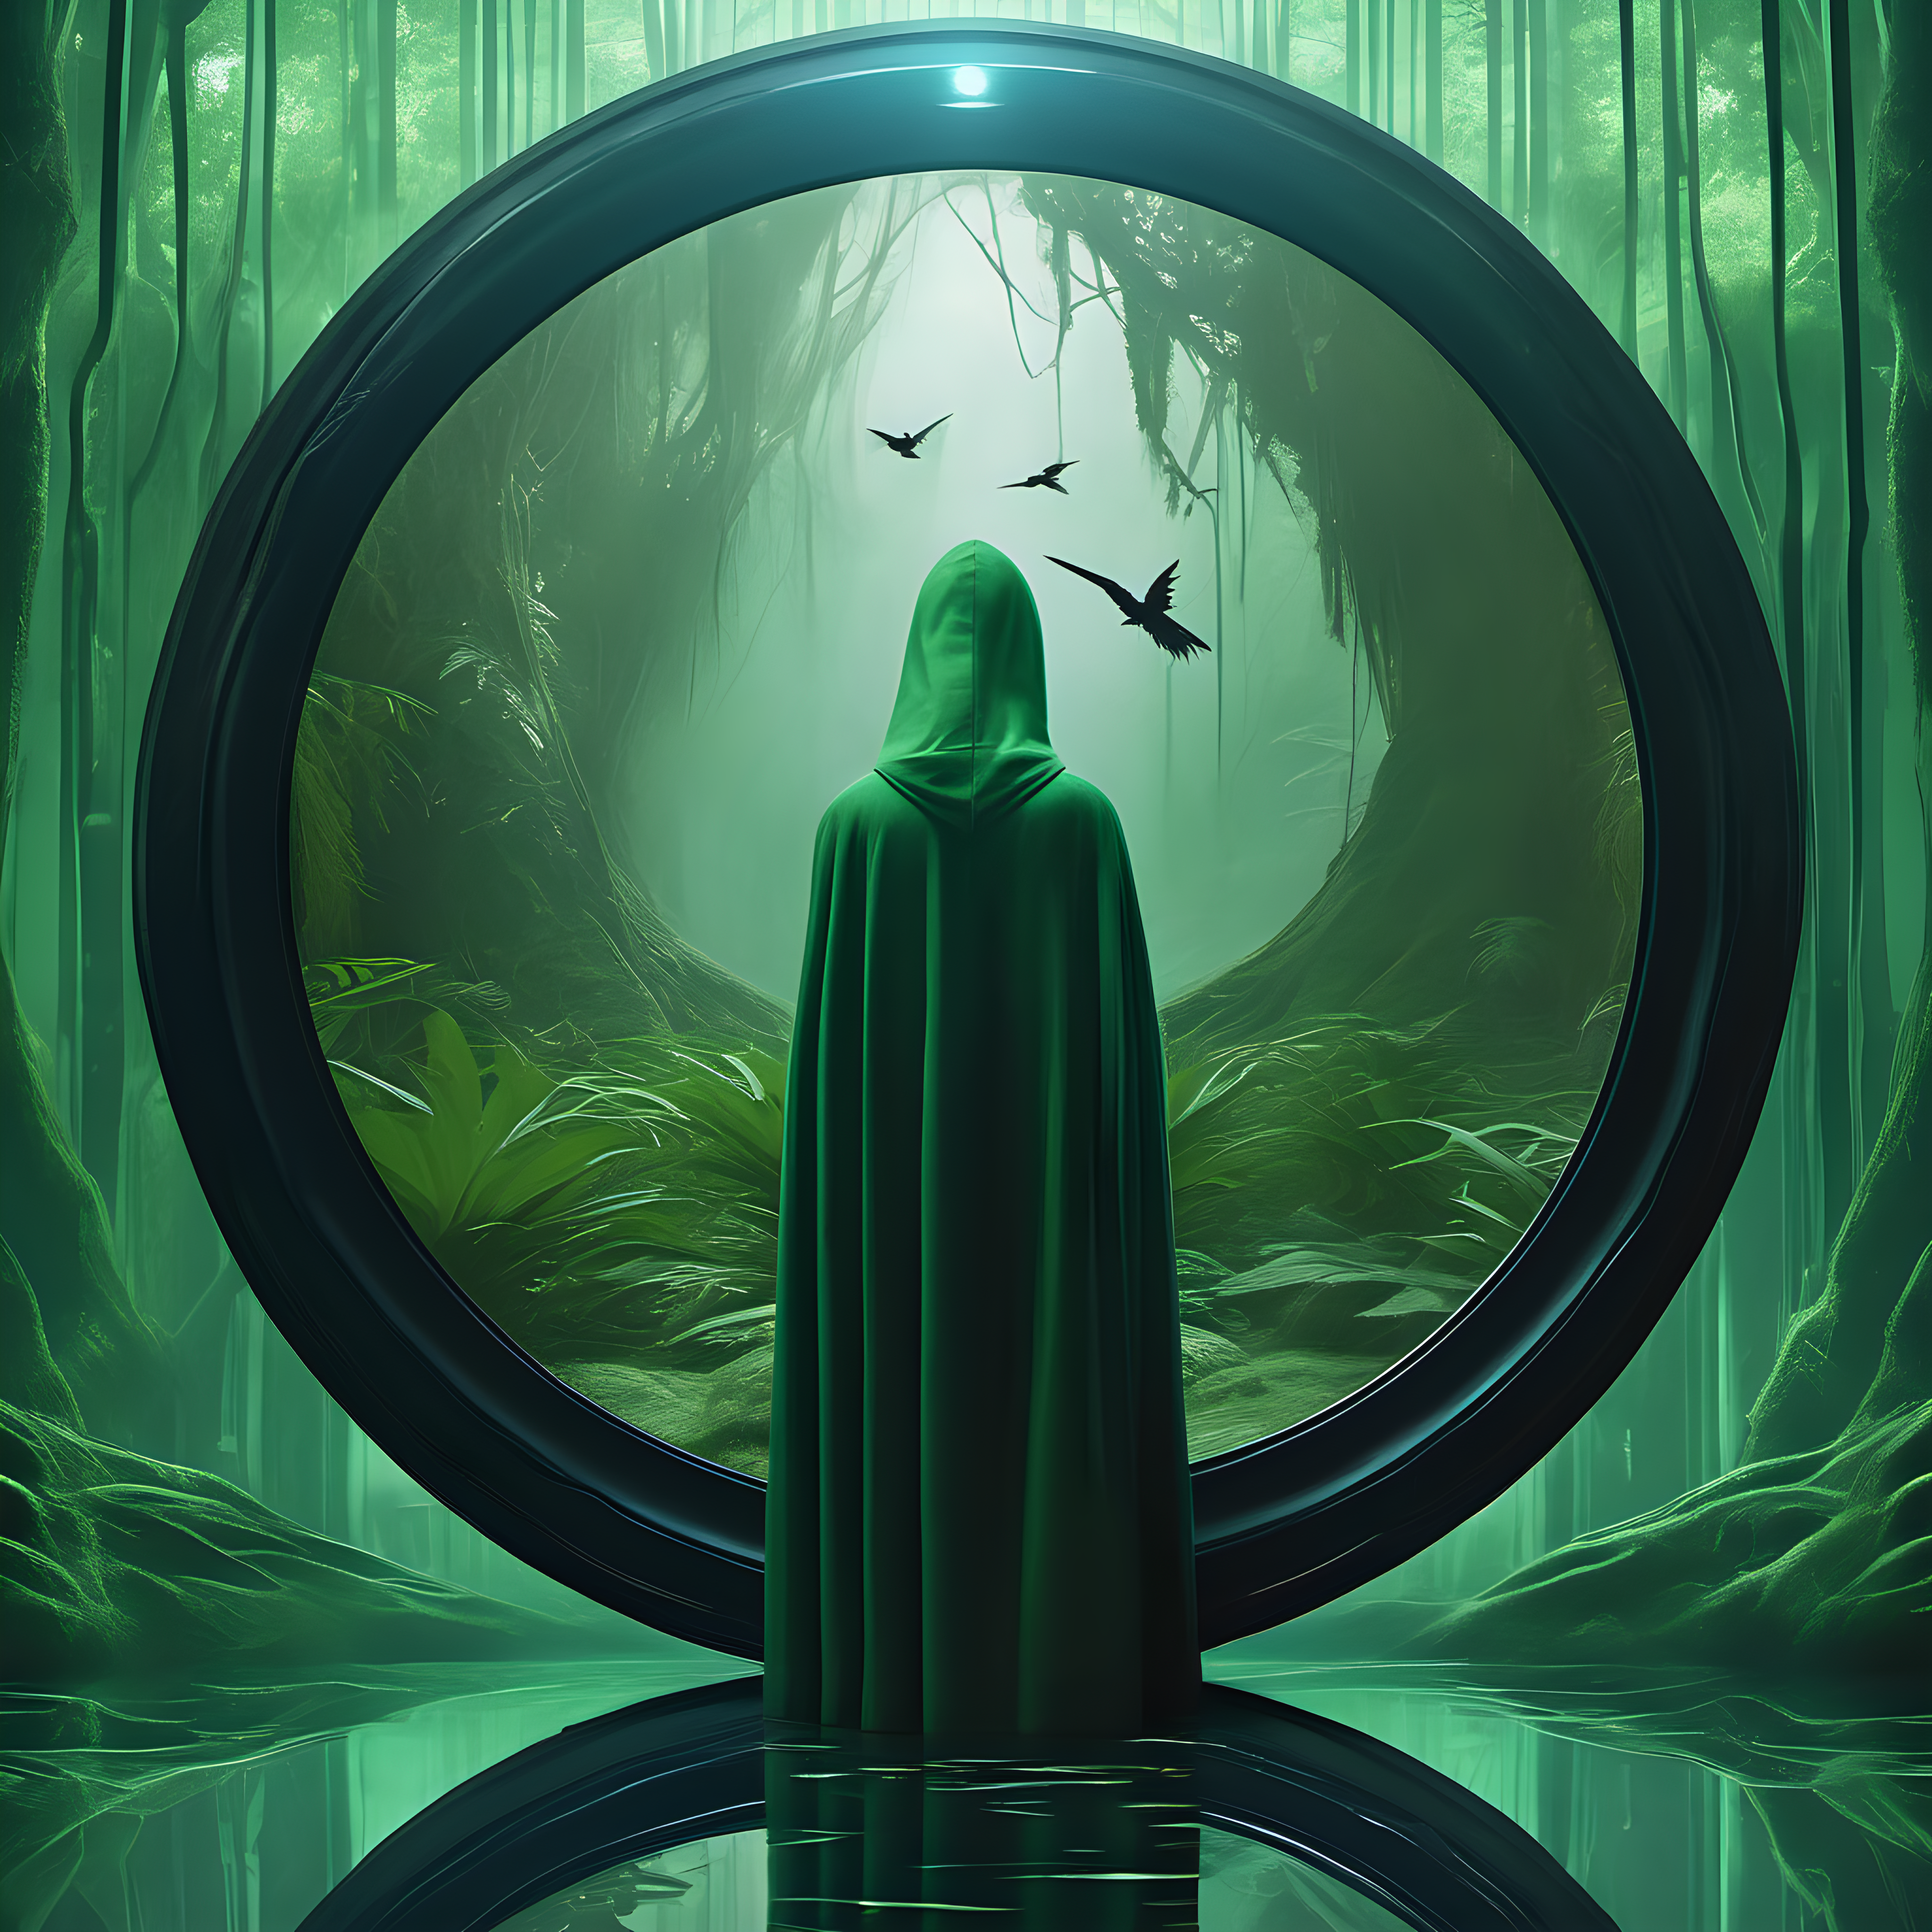 a hooded entity with a tribal cloak looking into a giant dimensional mirror which subtly shows a reflection which is similar yet dark, eerie and different, environment is a huge green futuristic jungle with a few small birds